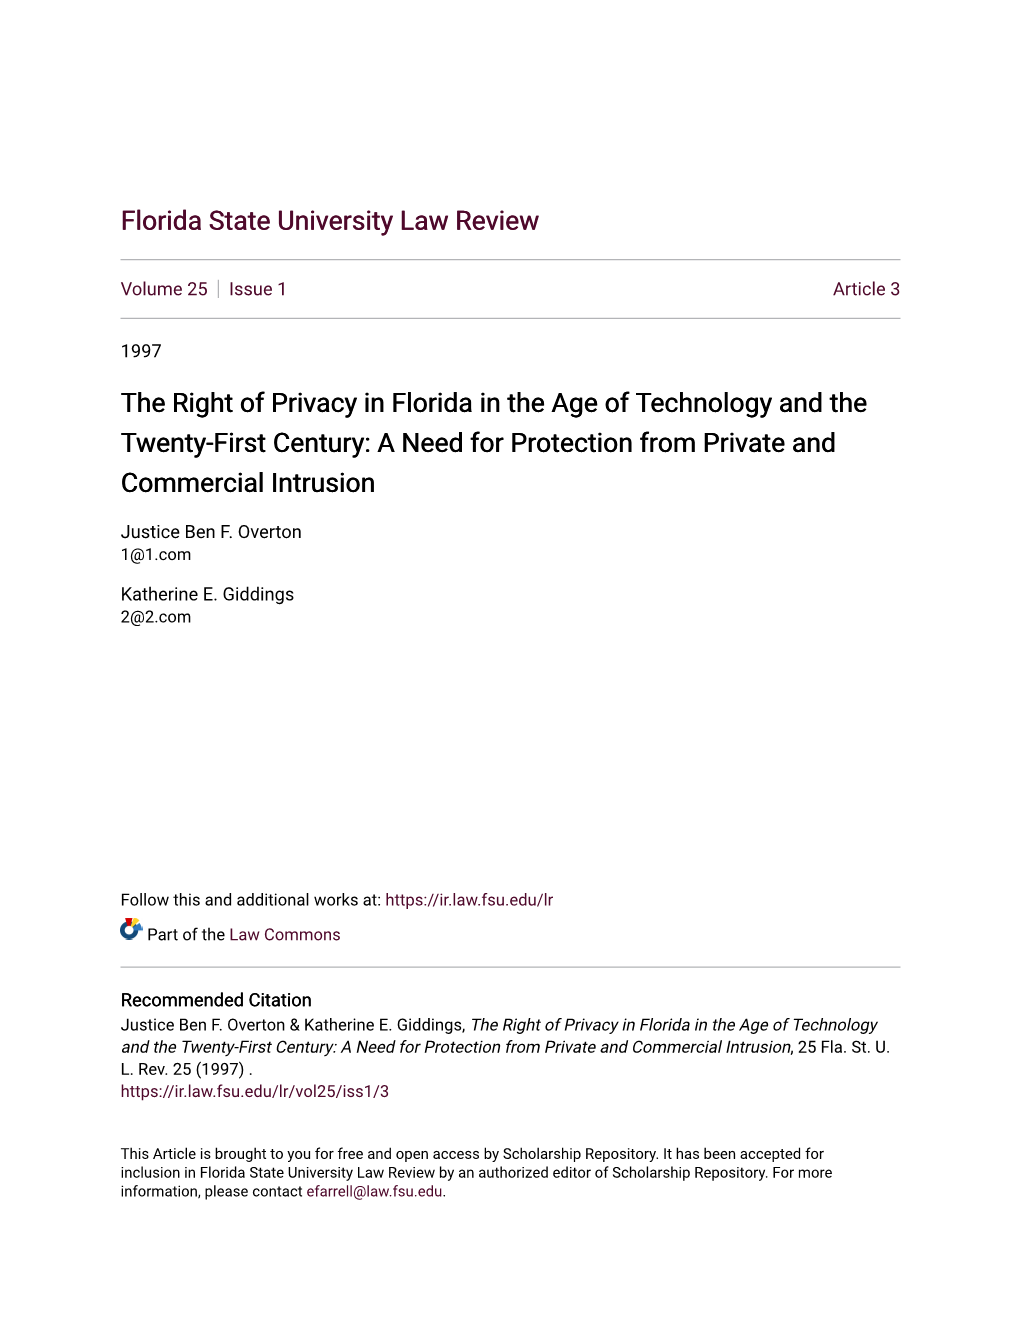 The Right of Privacy in Florida in the Age of Technology and the Twenty-First Century: a Need for Protection from Private and Commercial Intrusion